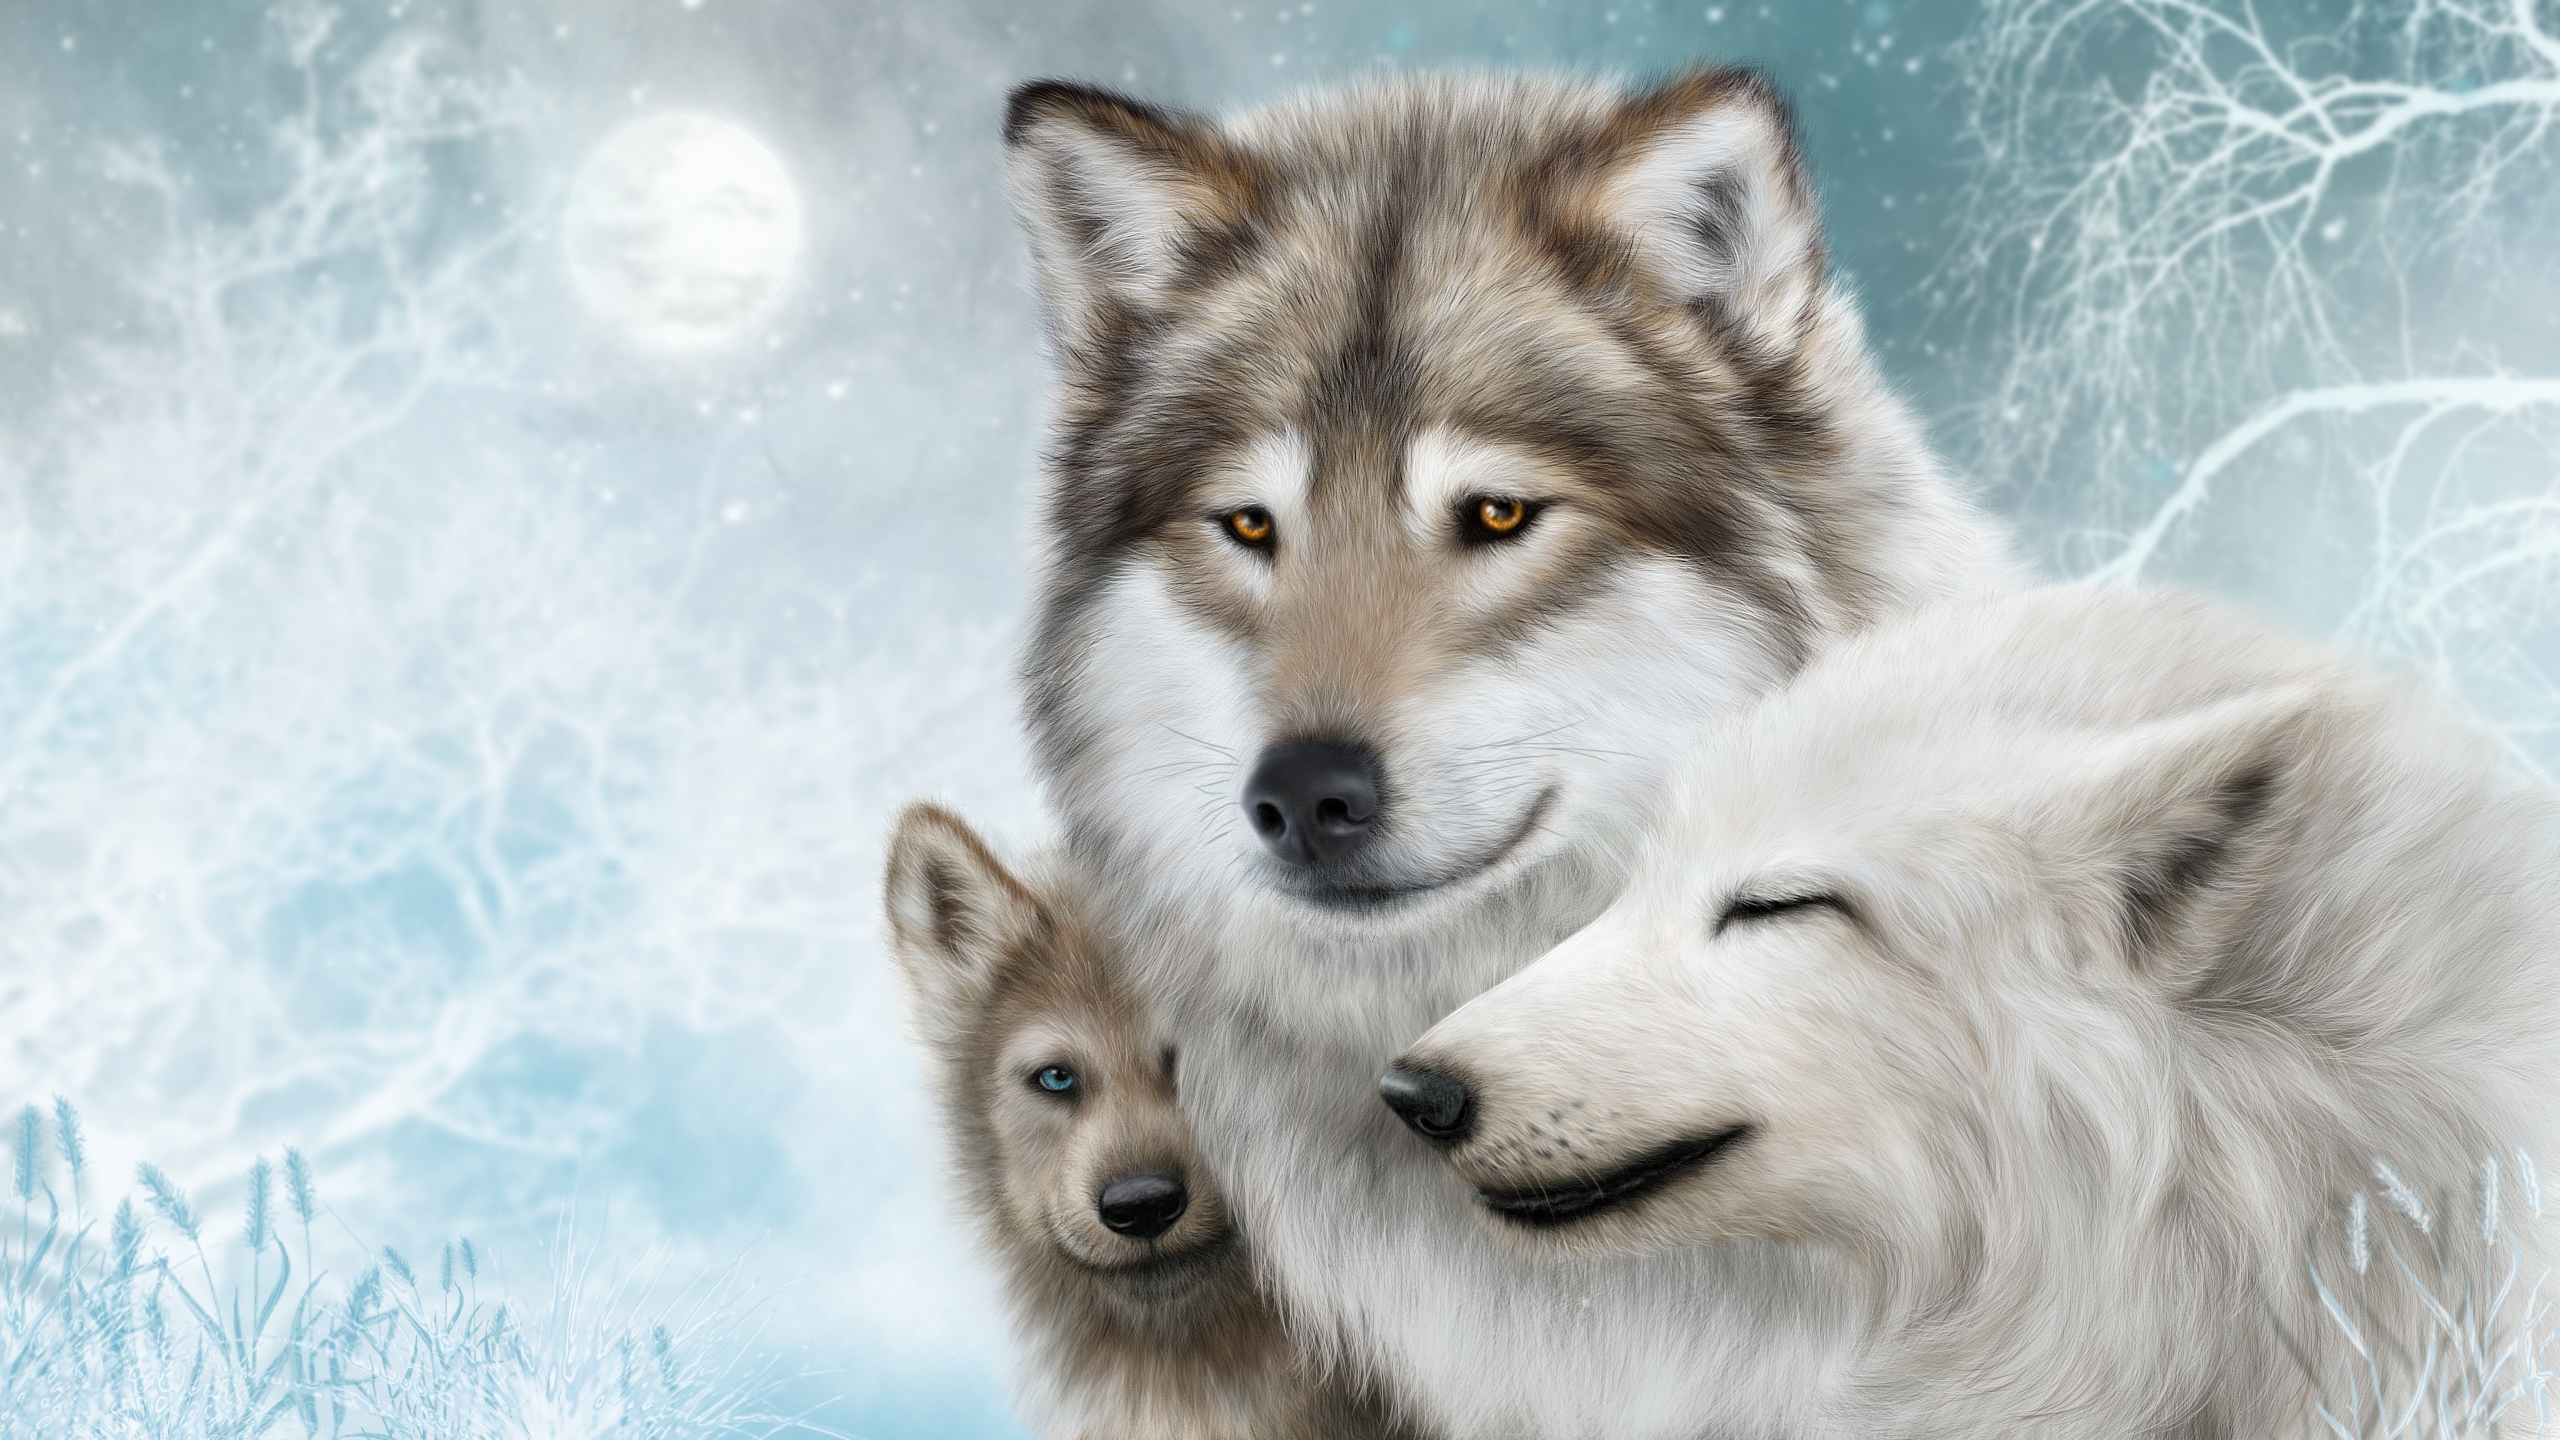 Wolf Painting HD Wallpaper